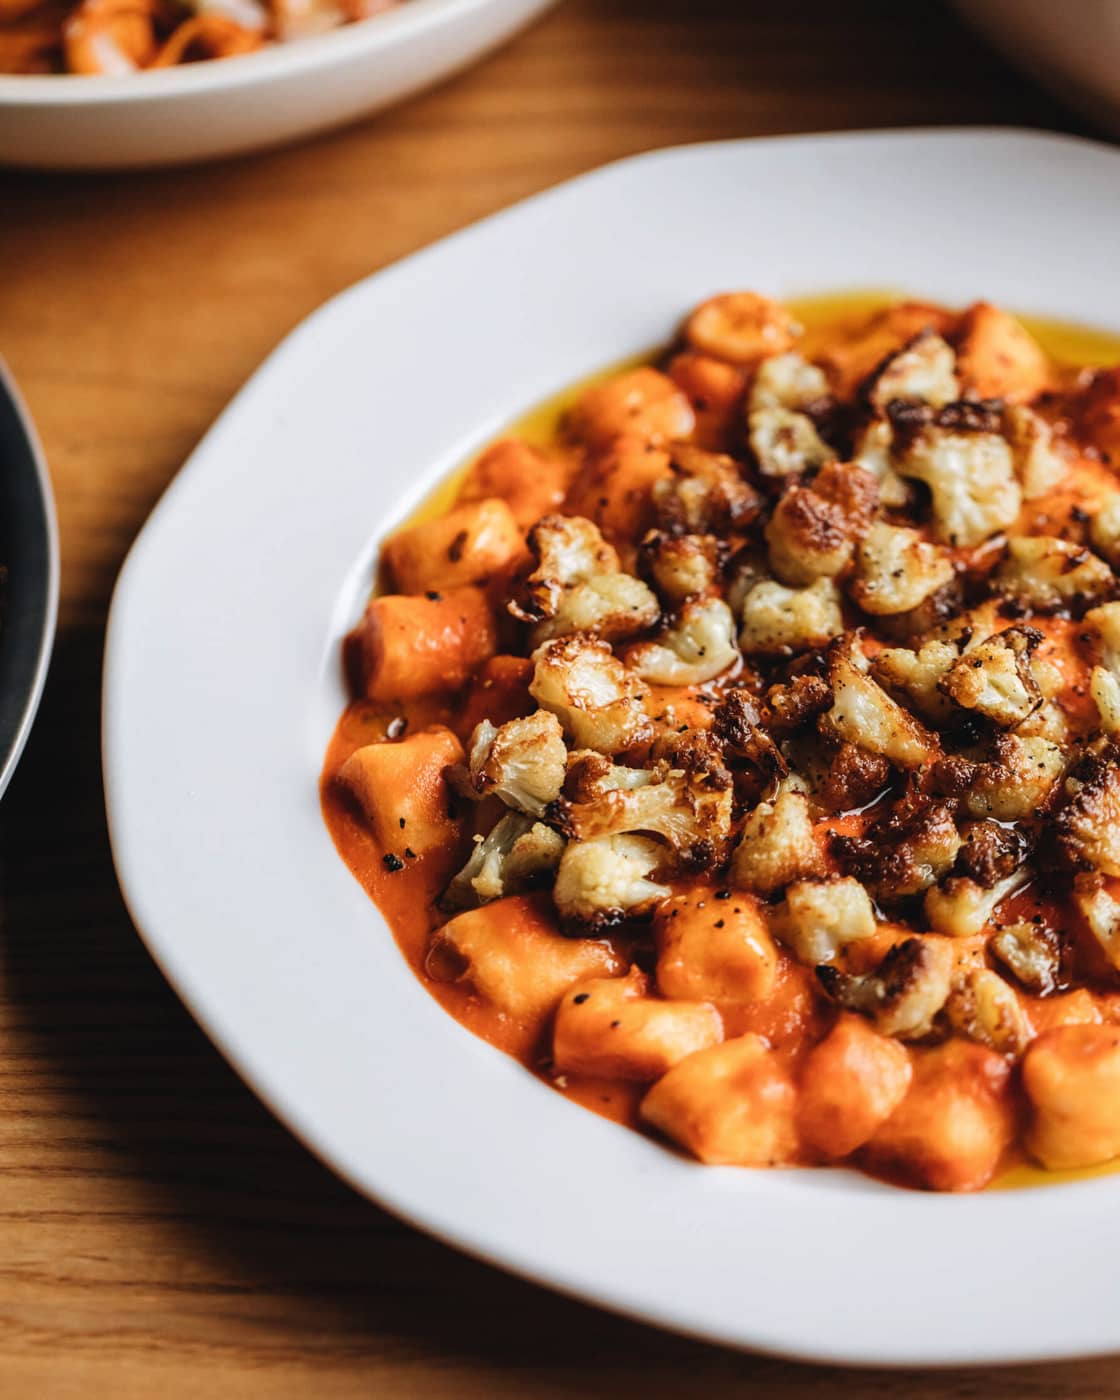 GNOCCHI WITH ROASTED CAULIFLOWER AND ROSÉE SAUCE